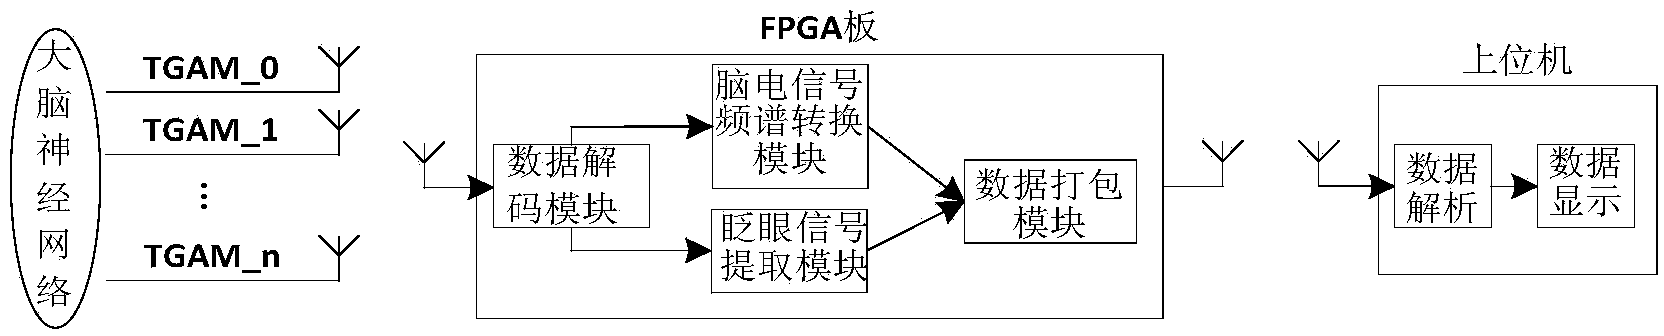 FPGA (Field Programmable Gate Array) based electroencephalogram and electro-oculogram signal analysis method and system